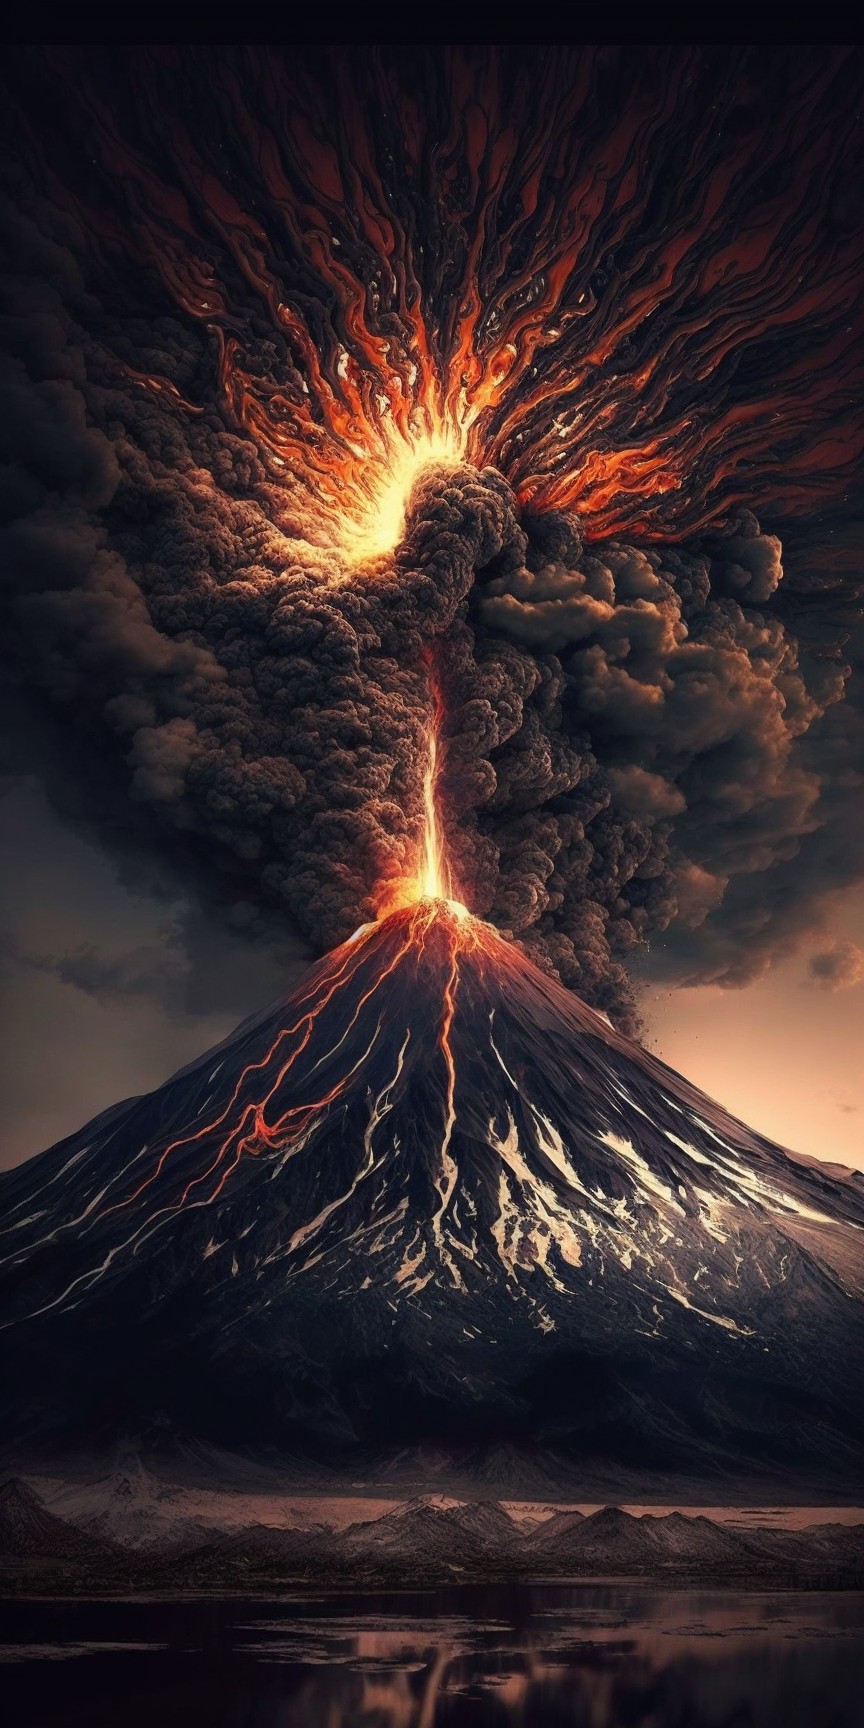 6 images of volcanic eruption billowing smoke by Midjourney